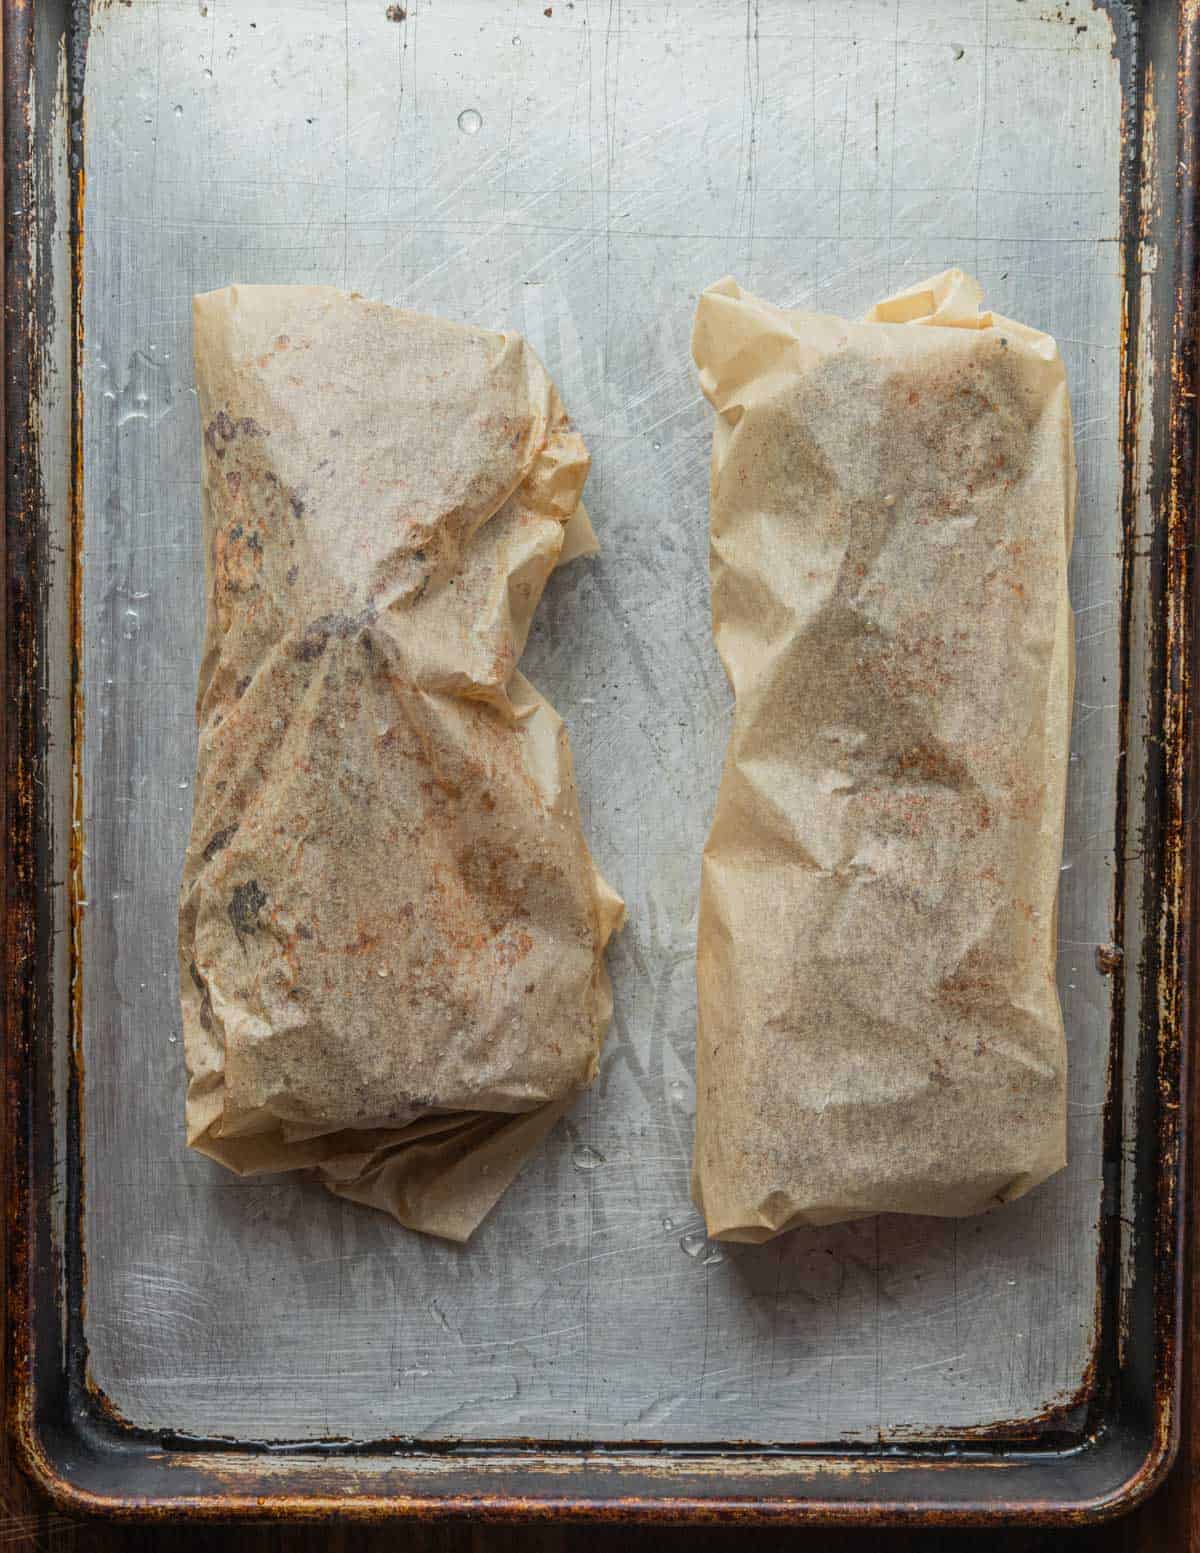 Smoked pork briskets wrapped in parchment paper. 